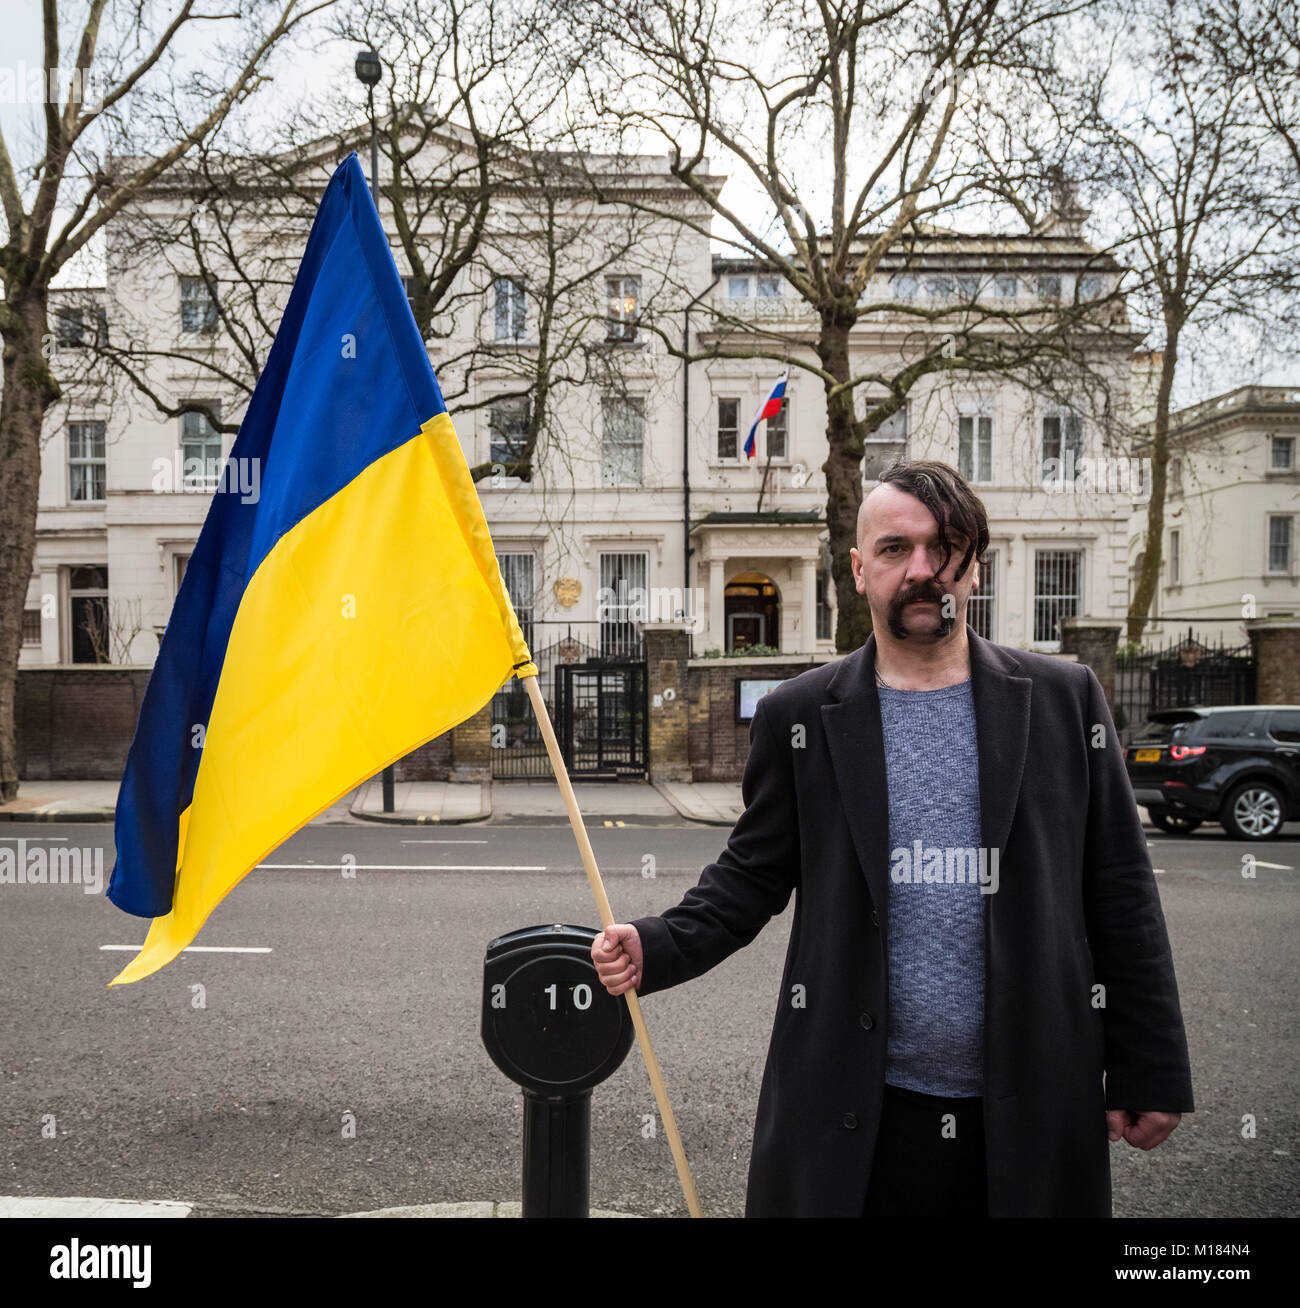 London, UK. 28th January, 2018. British Ukrainians protest opposite the Russian Embassy in West London to demand a boycott of the forthcoming FIFA World Cup 2018 taking place in Russia. Other demands include the British Government continues the pressure on Russia in order to secure Ukraine's territorial integrity and sovereignty, and to restore peace in Ukraine. © Guy Corbishley/Alamy Live News Stock Photo